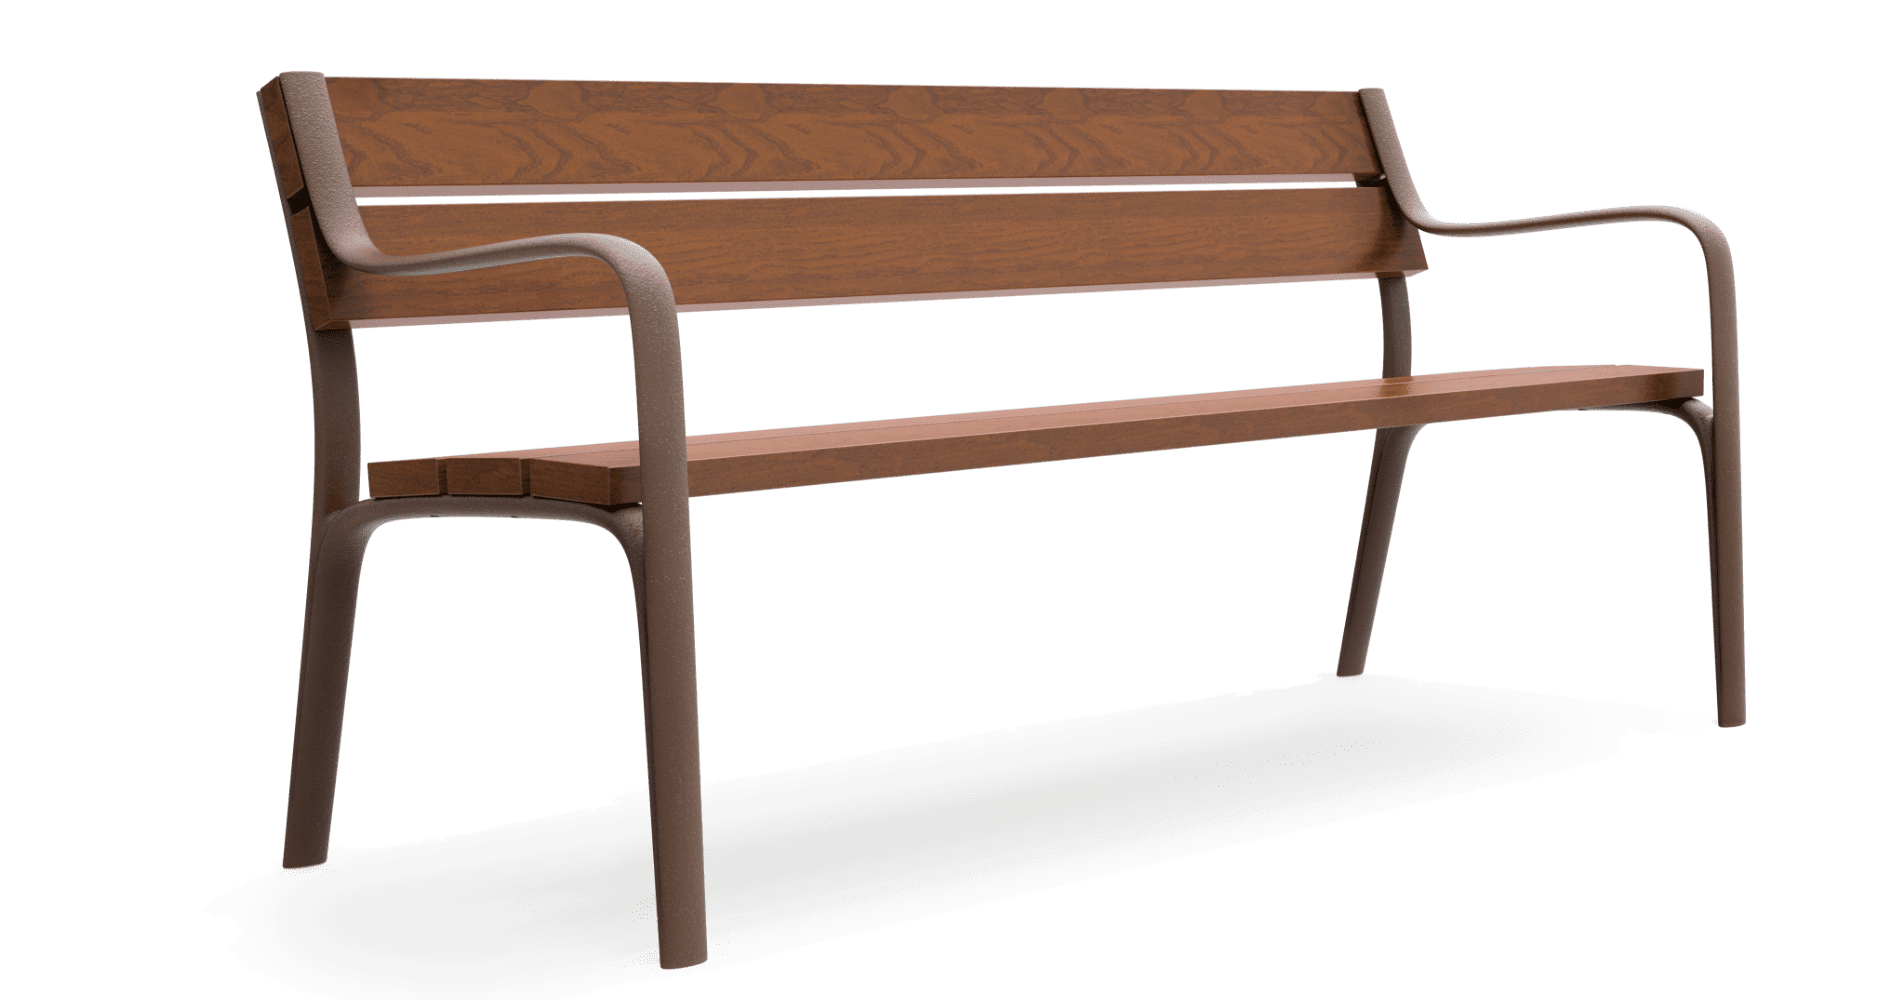 dictator more and more embroidery Street Furniture | Benito